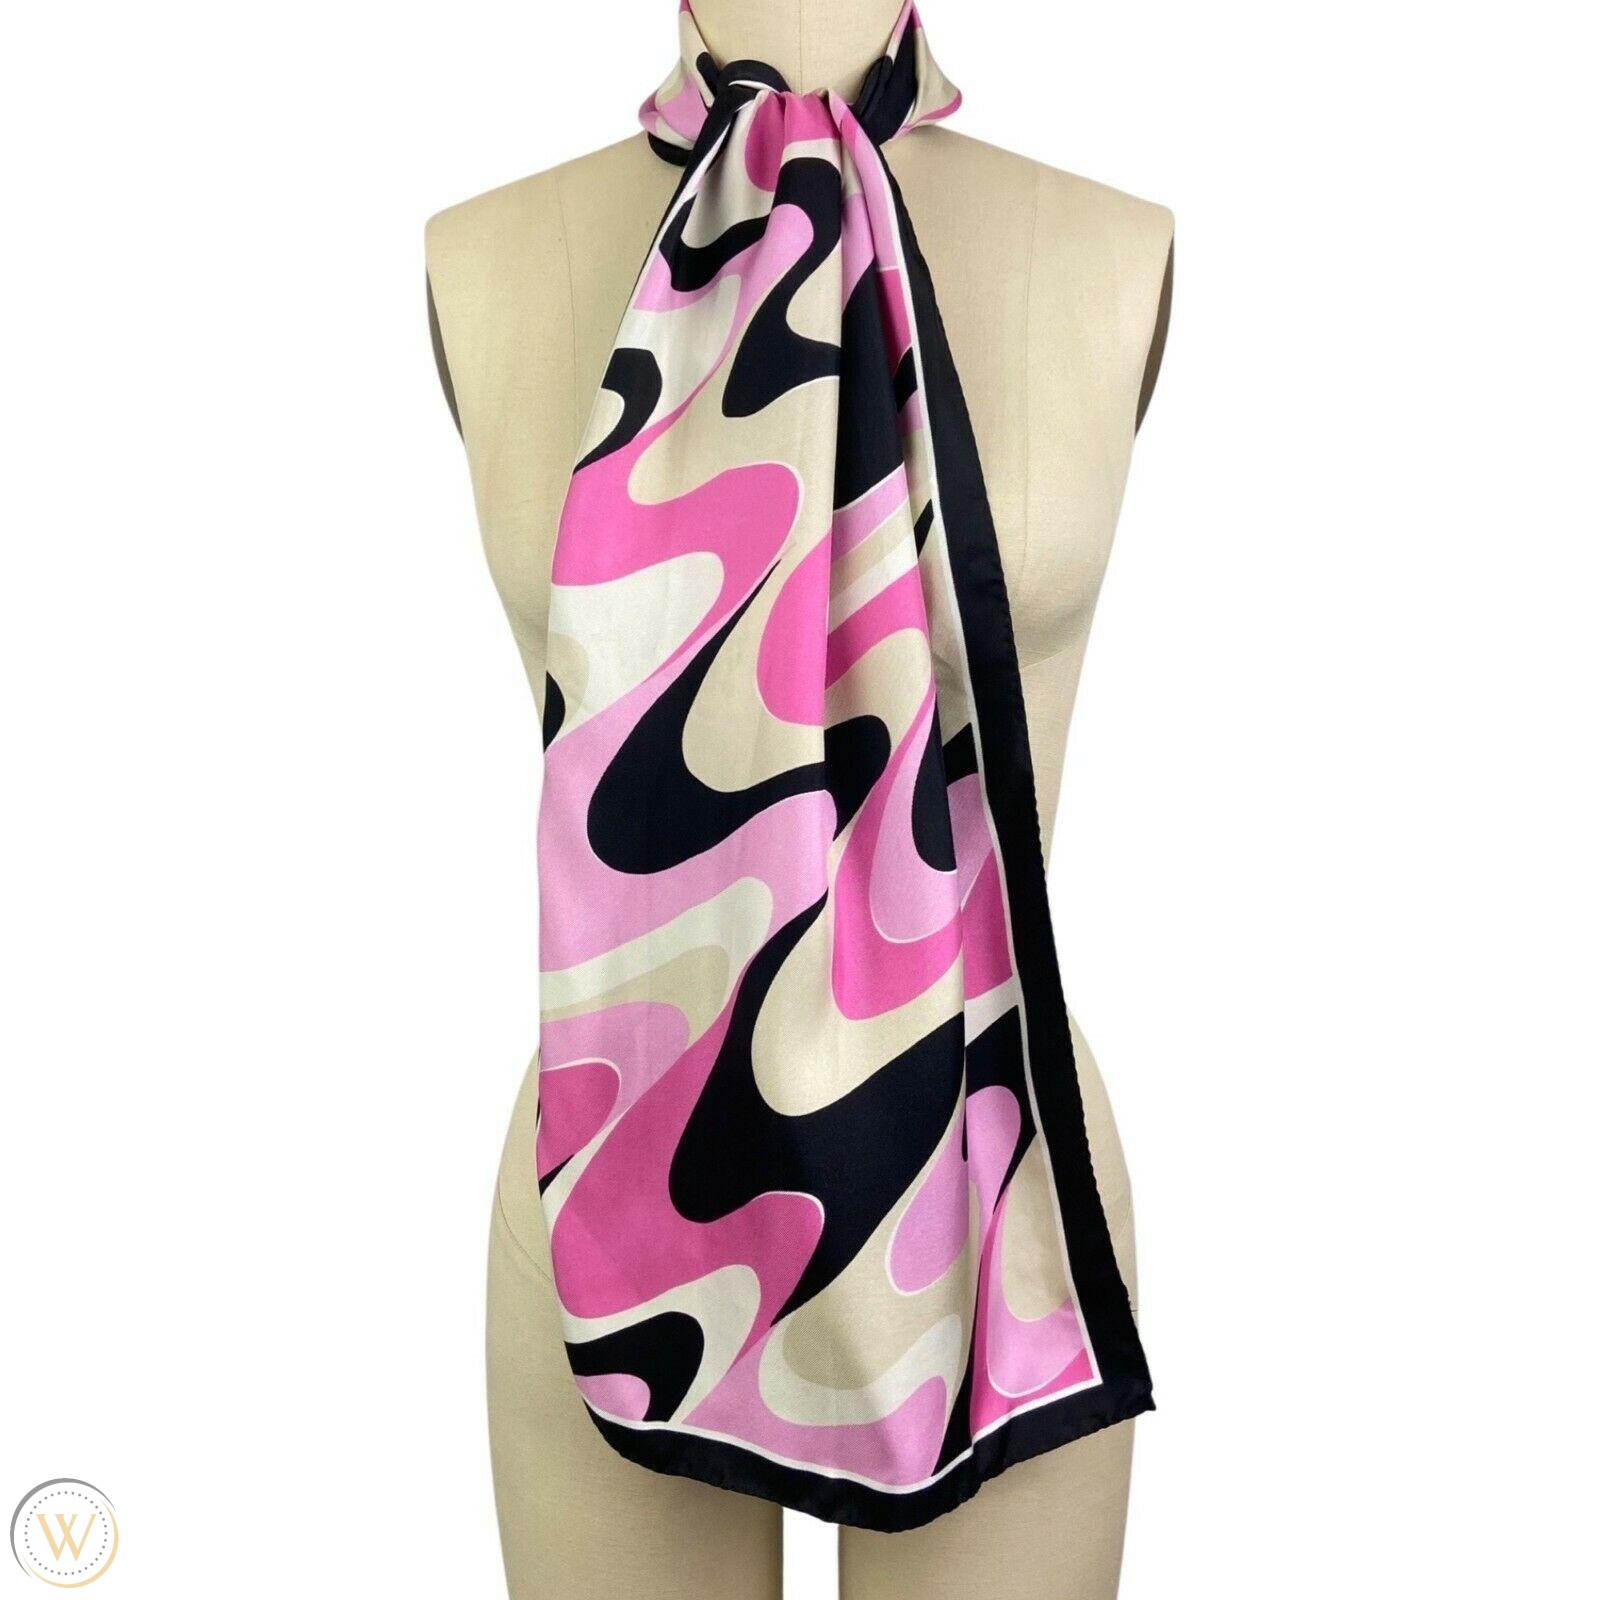 Vintage psychedelic pucci esque scarf 1 d380966aced4b77d713f00f4e7b2f5a5